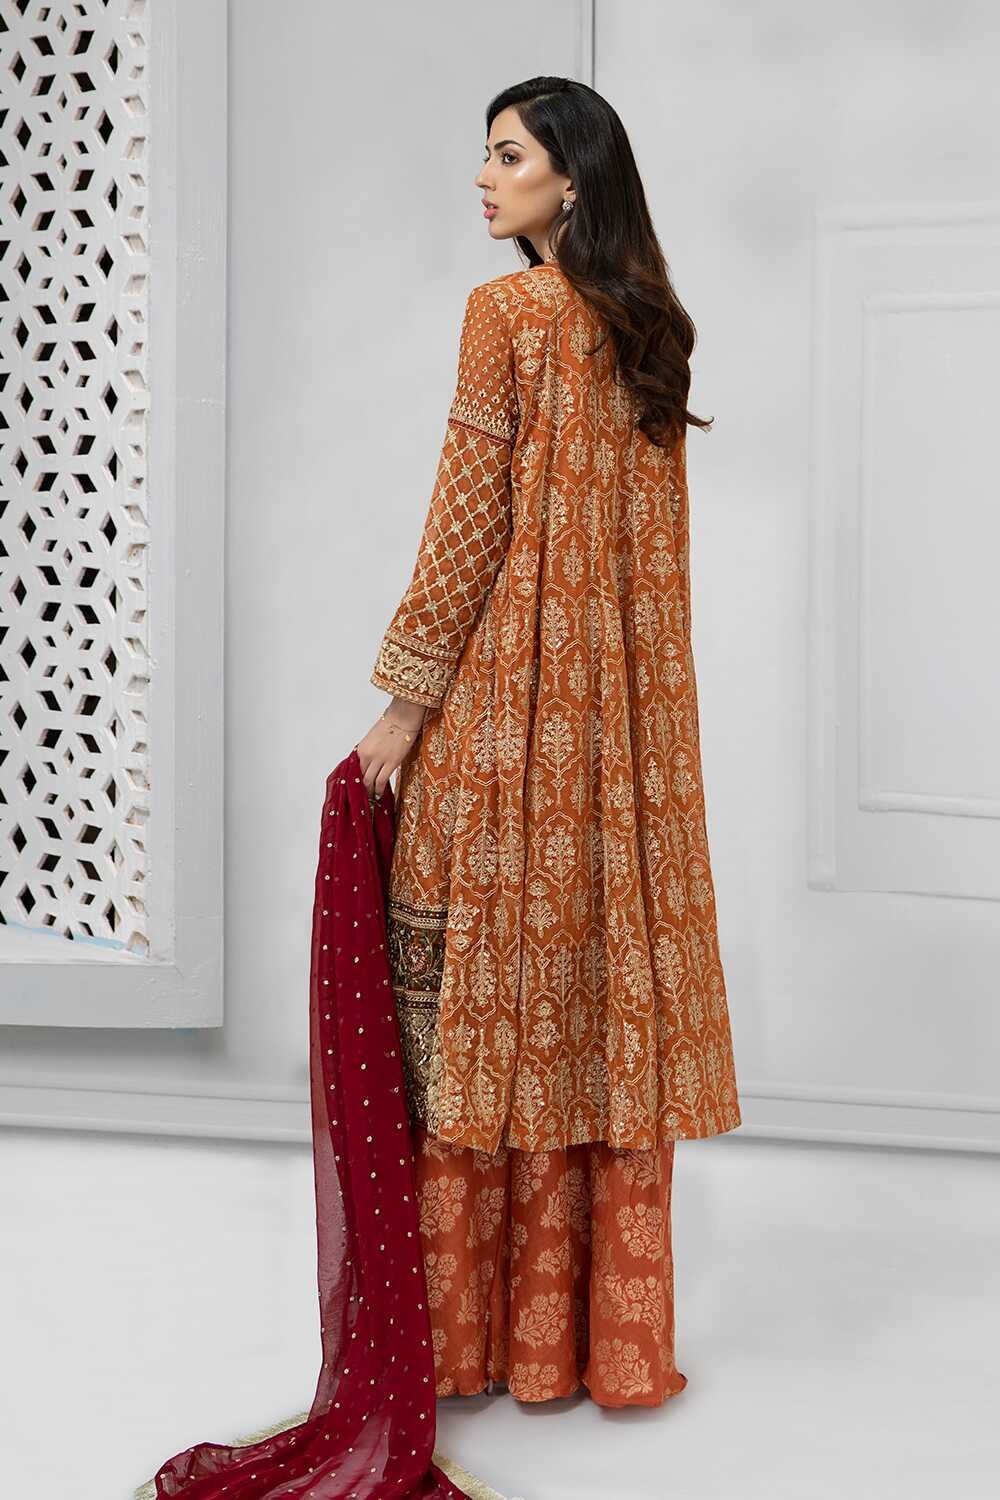 /2019/07/mariab-eid-collection-suit-rust-sf-1690-image2.jpeg